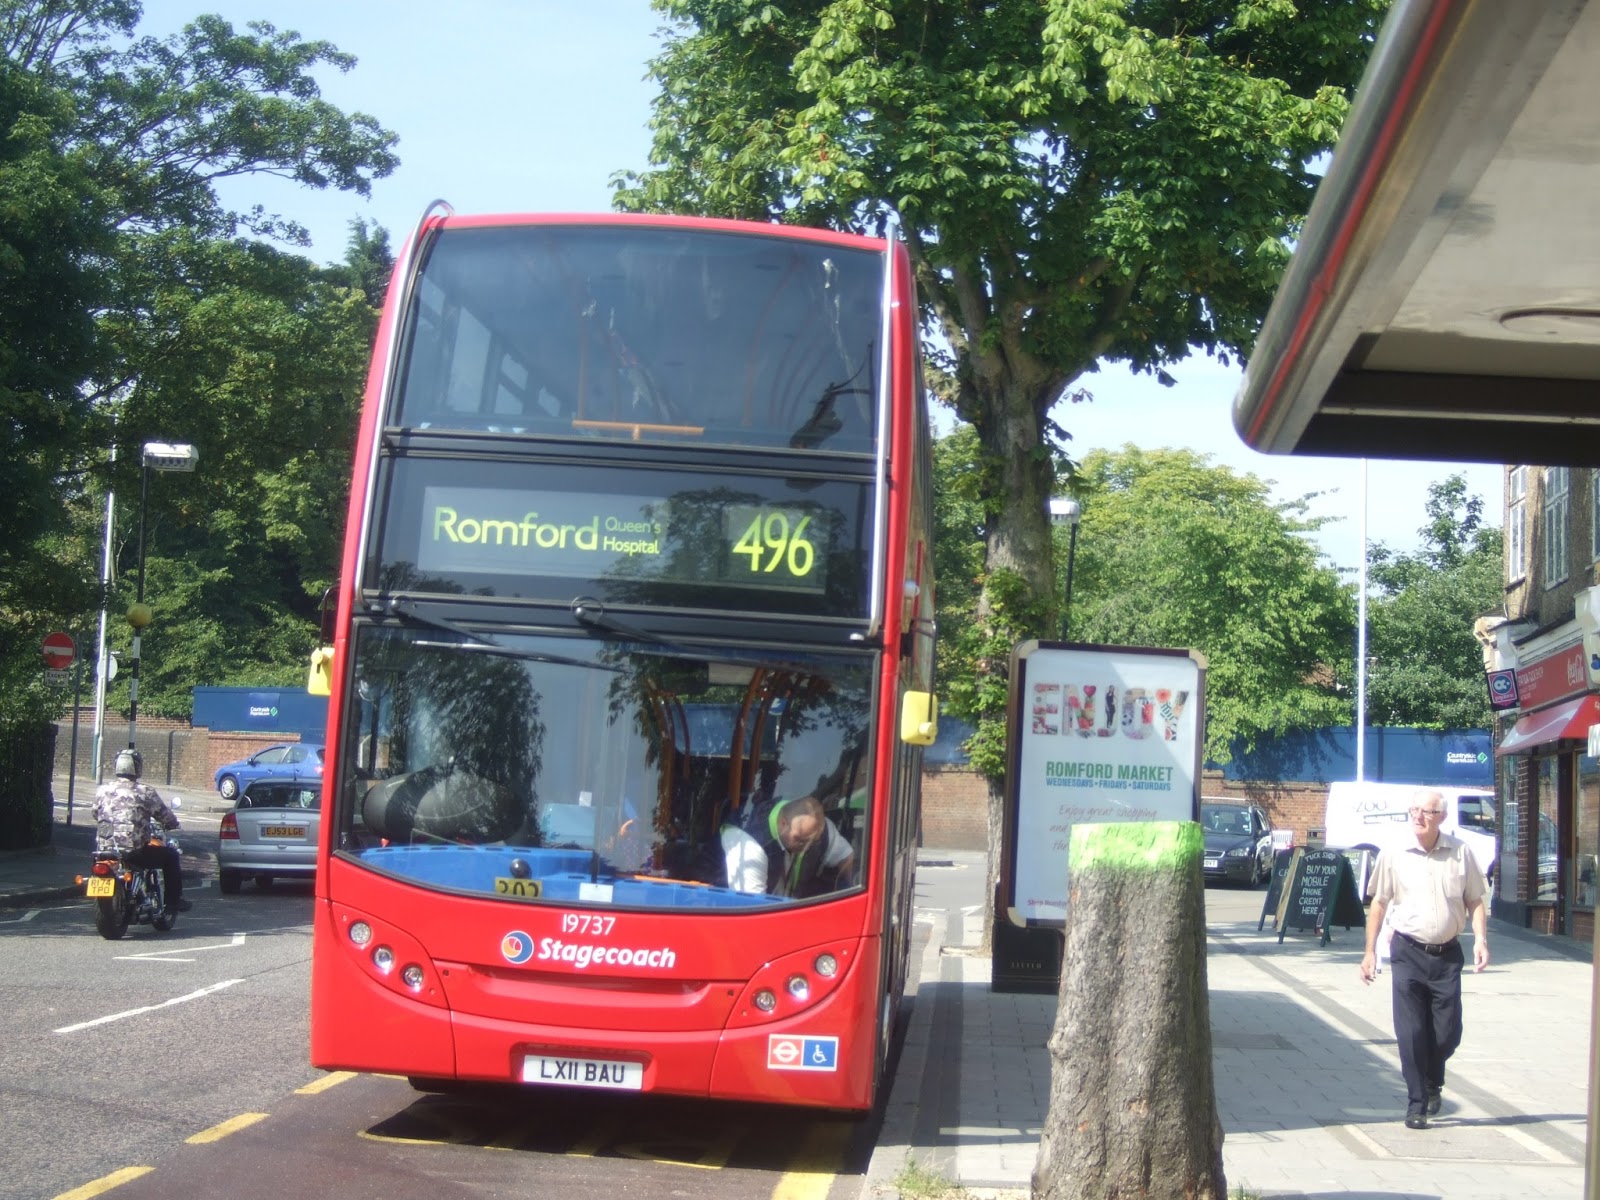 london-buses-one-bus-at-a-time-the-return-the-number-496-route